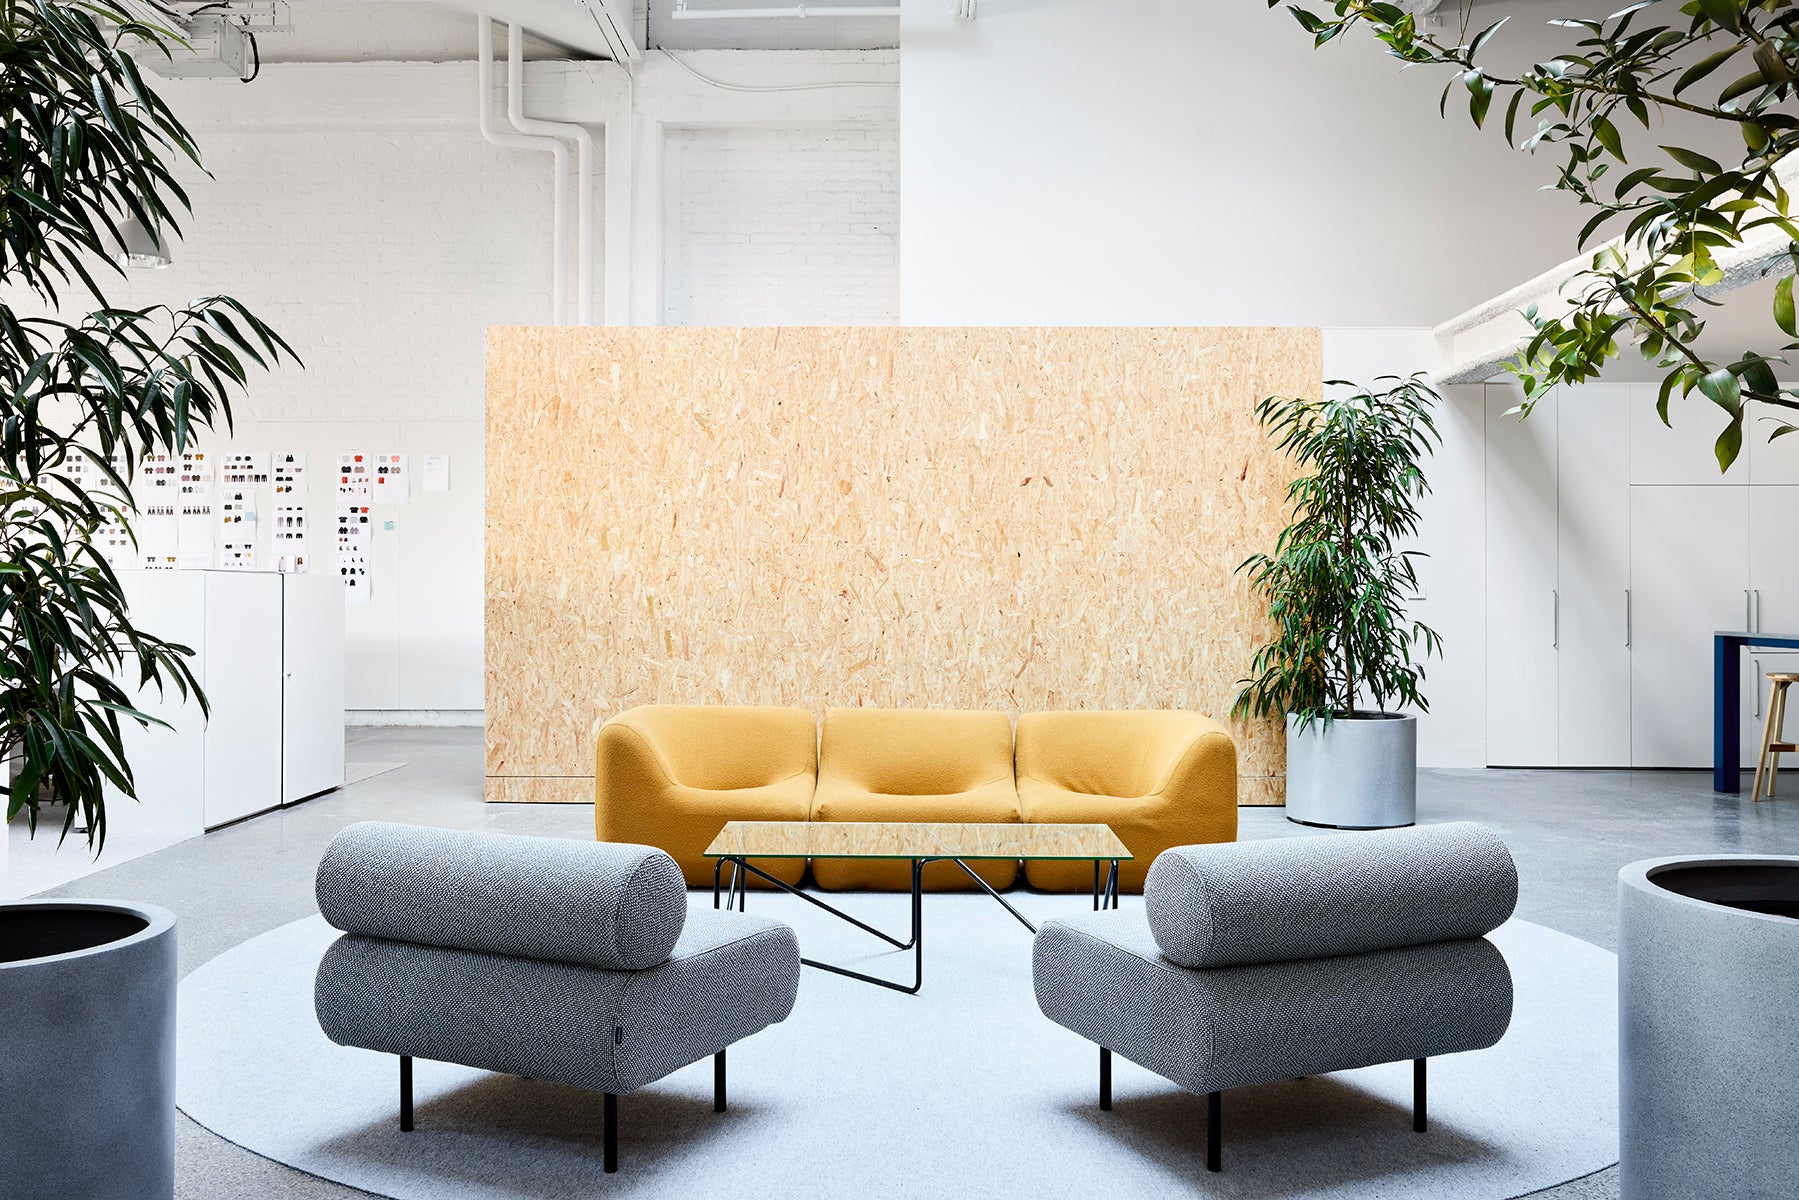 Cabin Seat |MAAP HQ BY CLARE COUSINS ARCHITECTS| DesignByThem